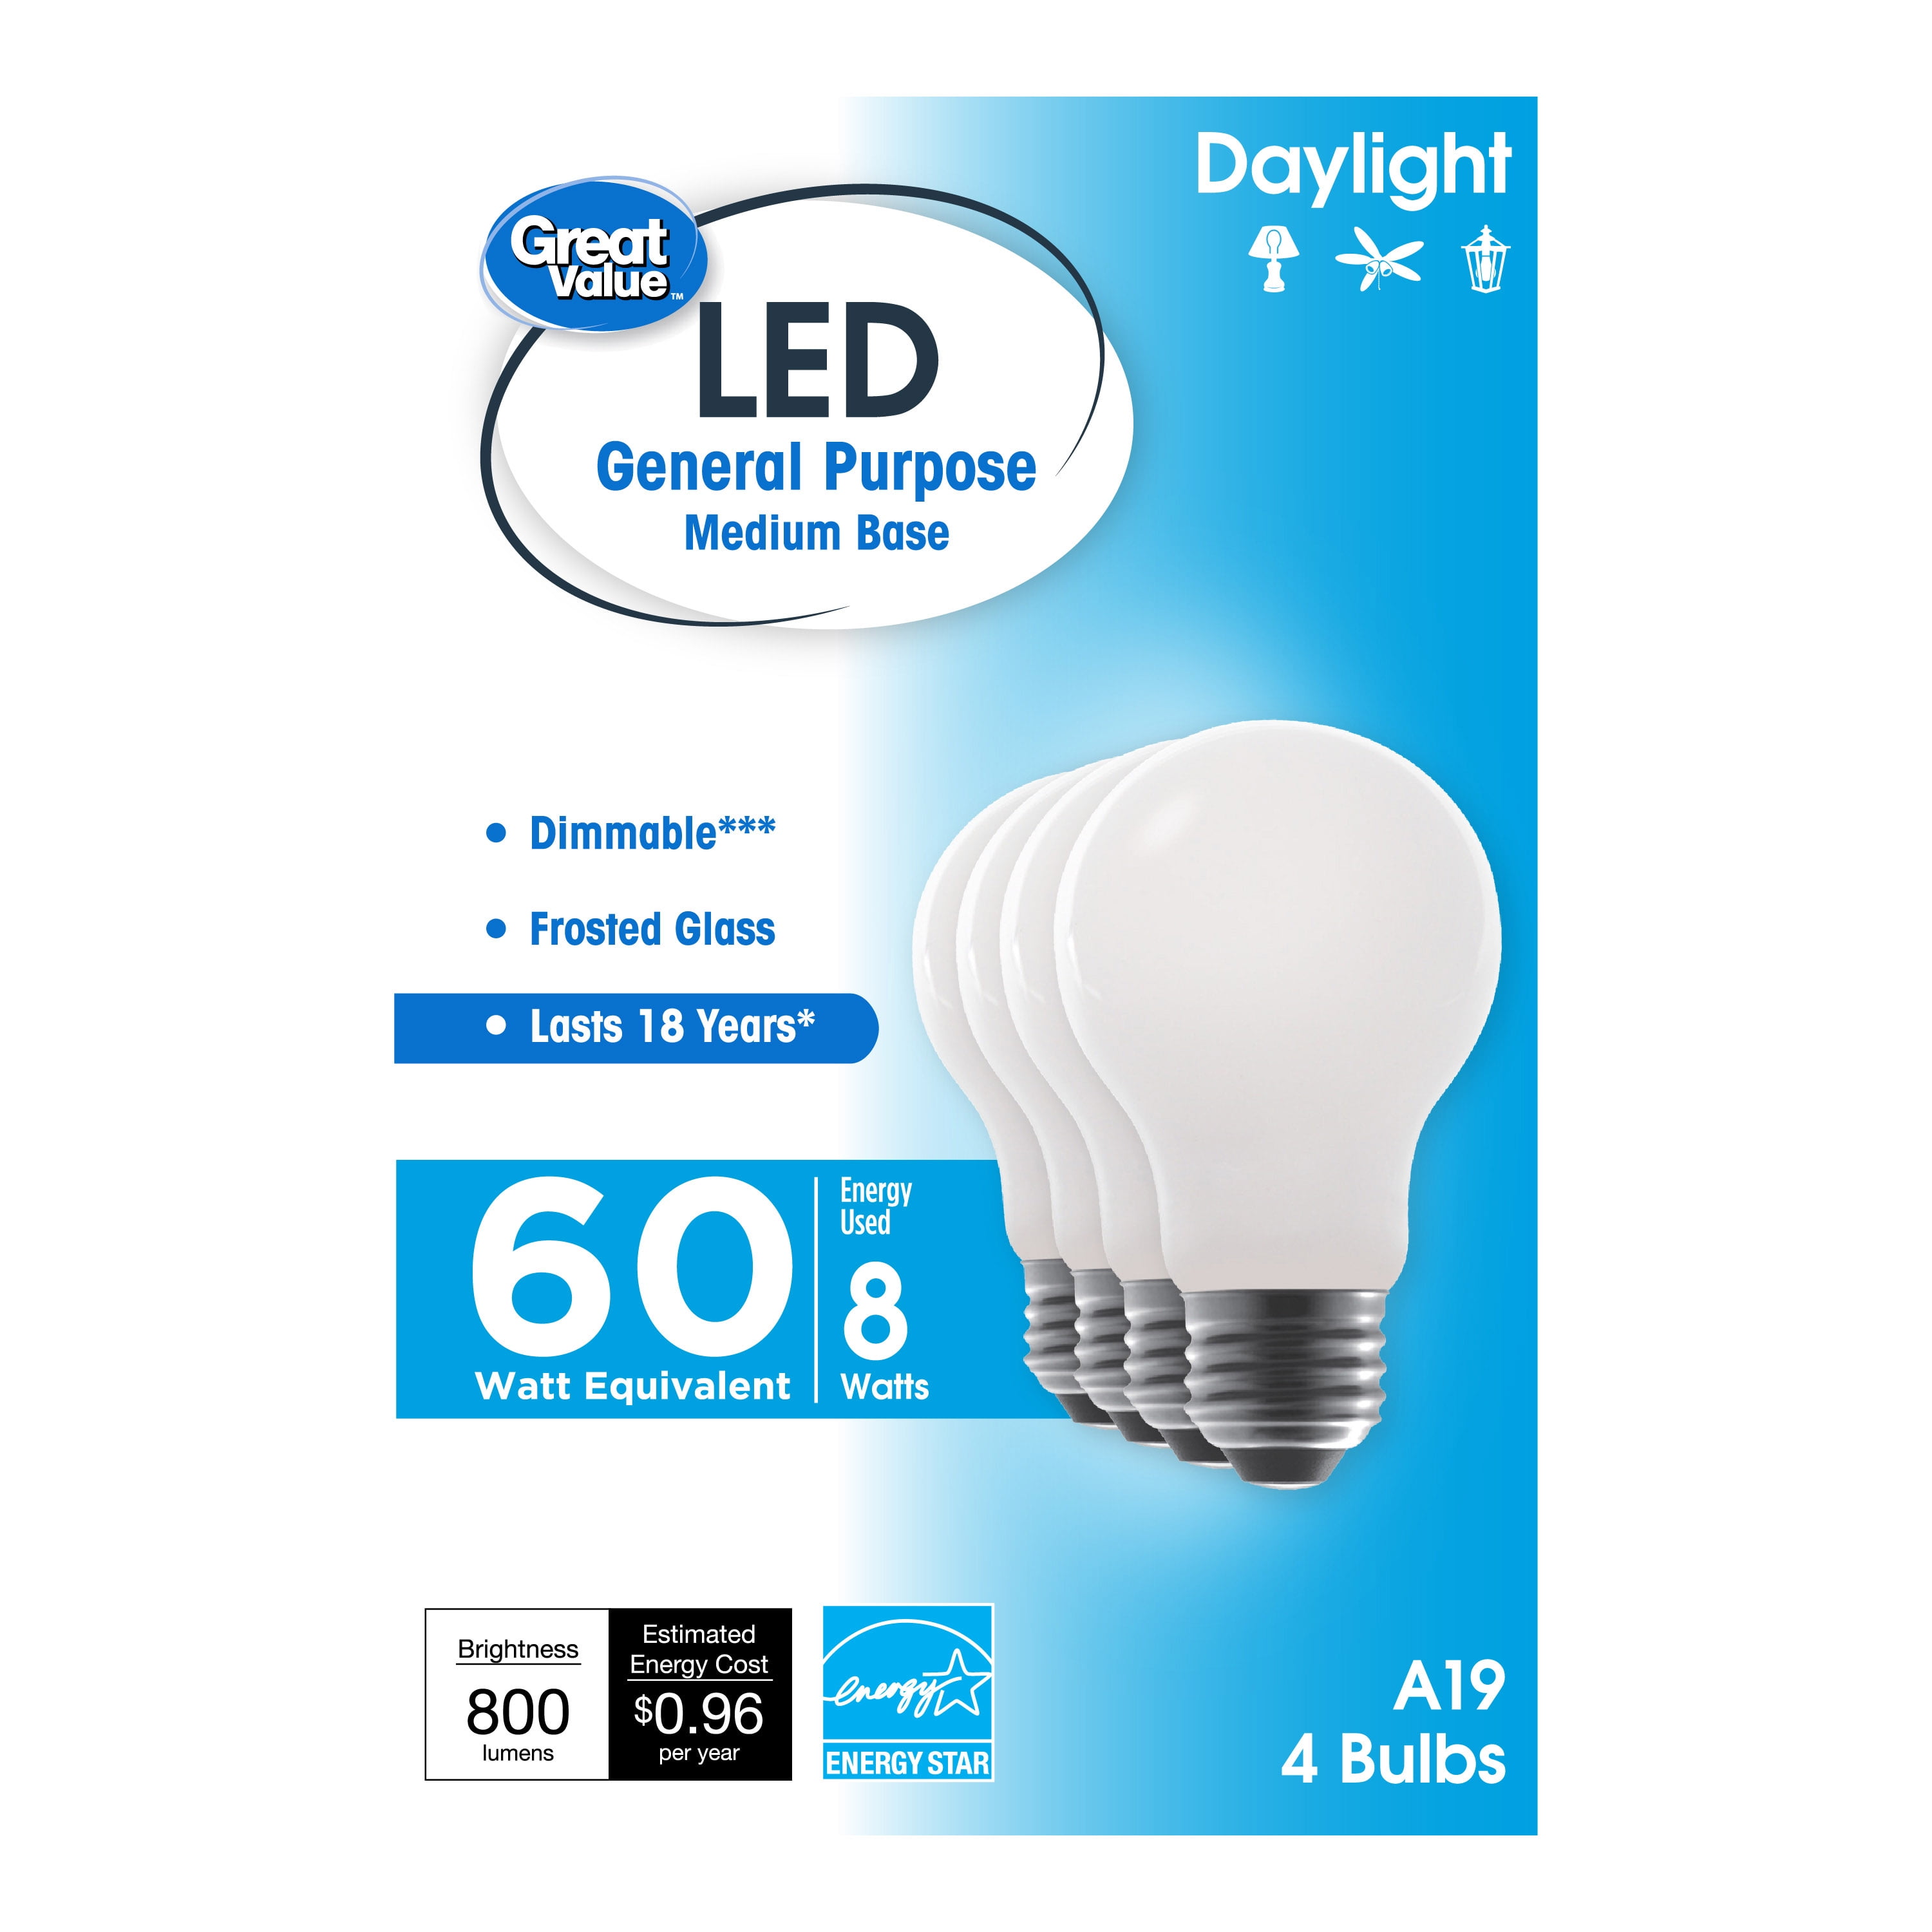 Great Value 18 Year LED Light Bulbs, A19 60 Watts Equivalent, 8 Watts Efficient, Daylight, Frosted 4 Pack - Walmart.com